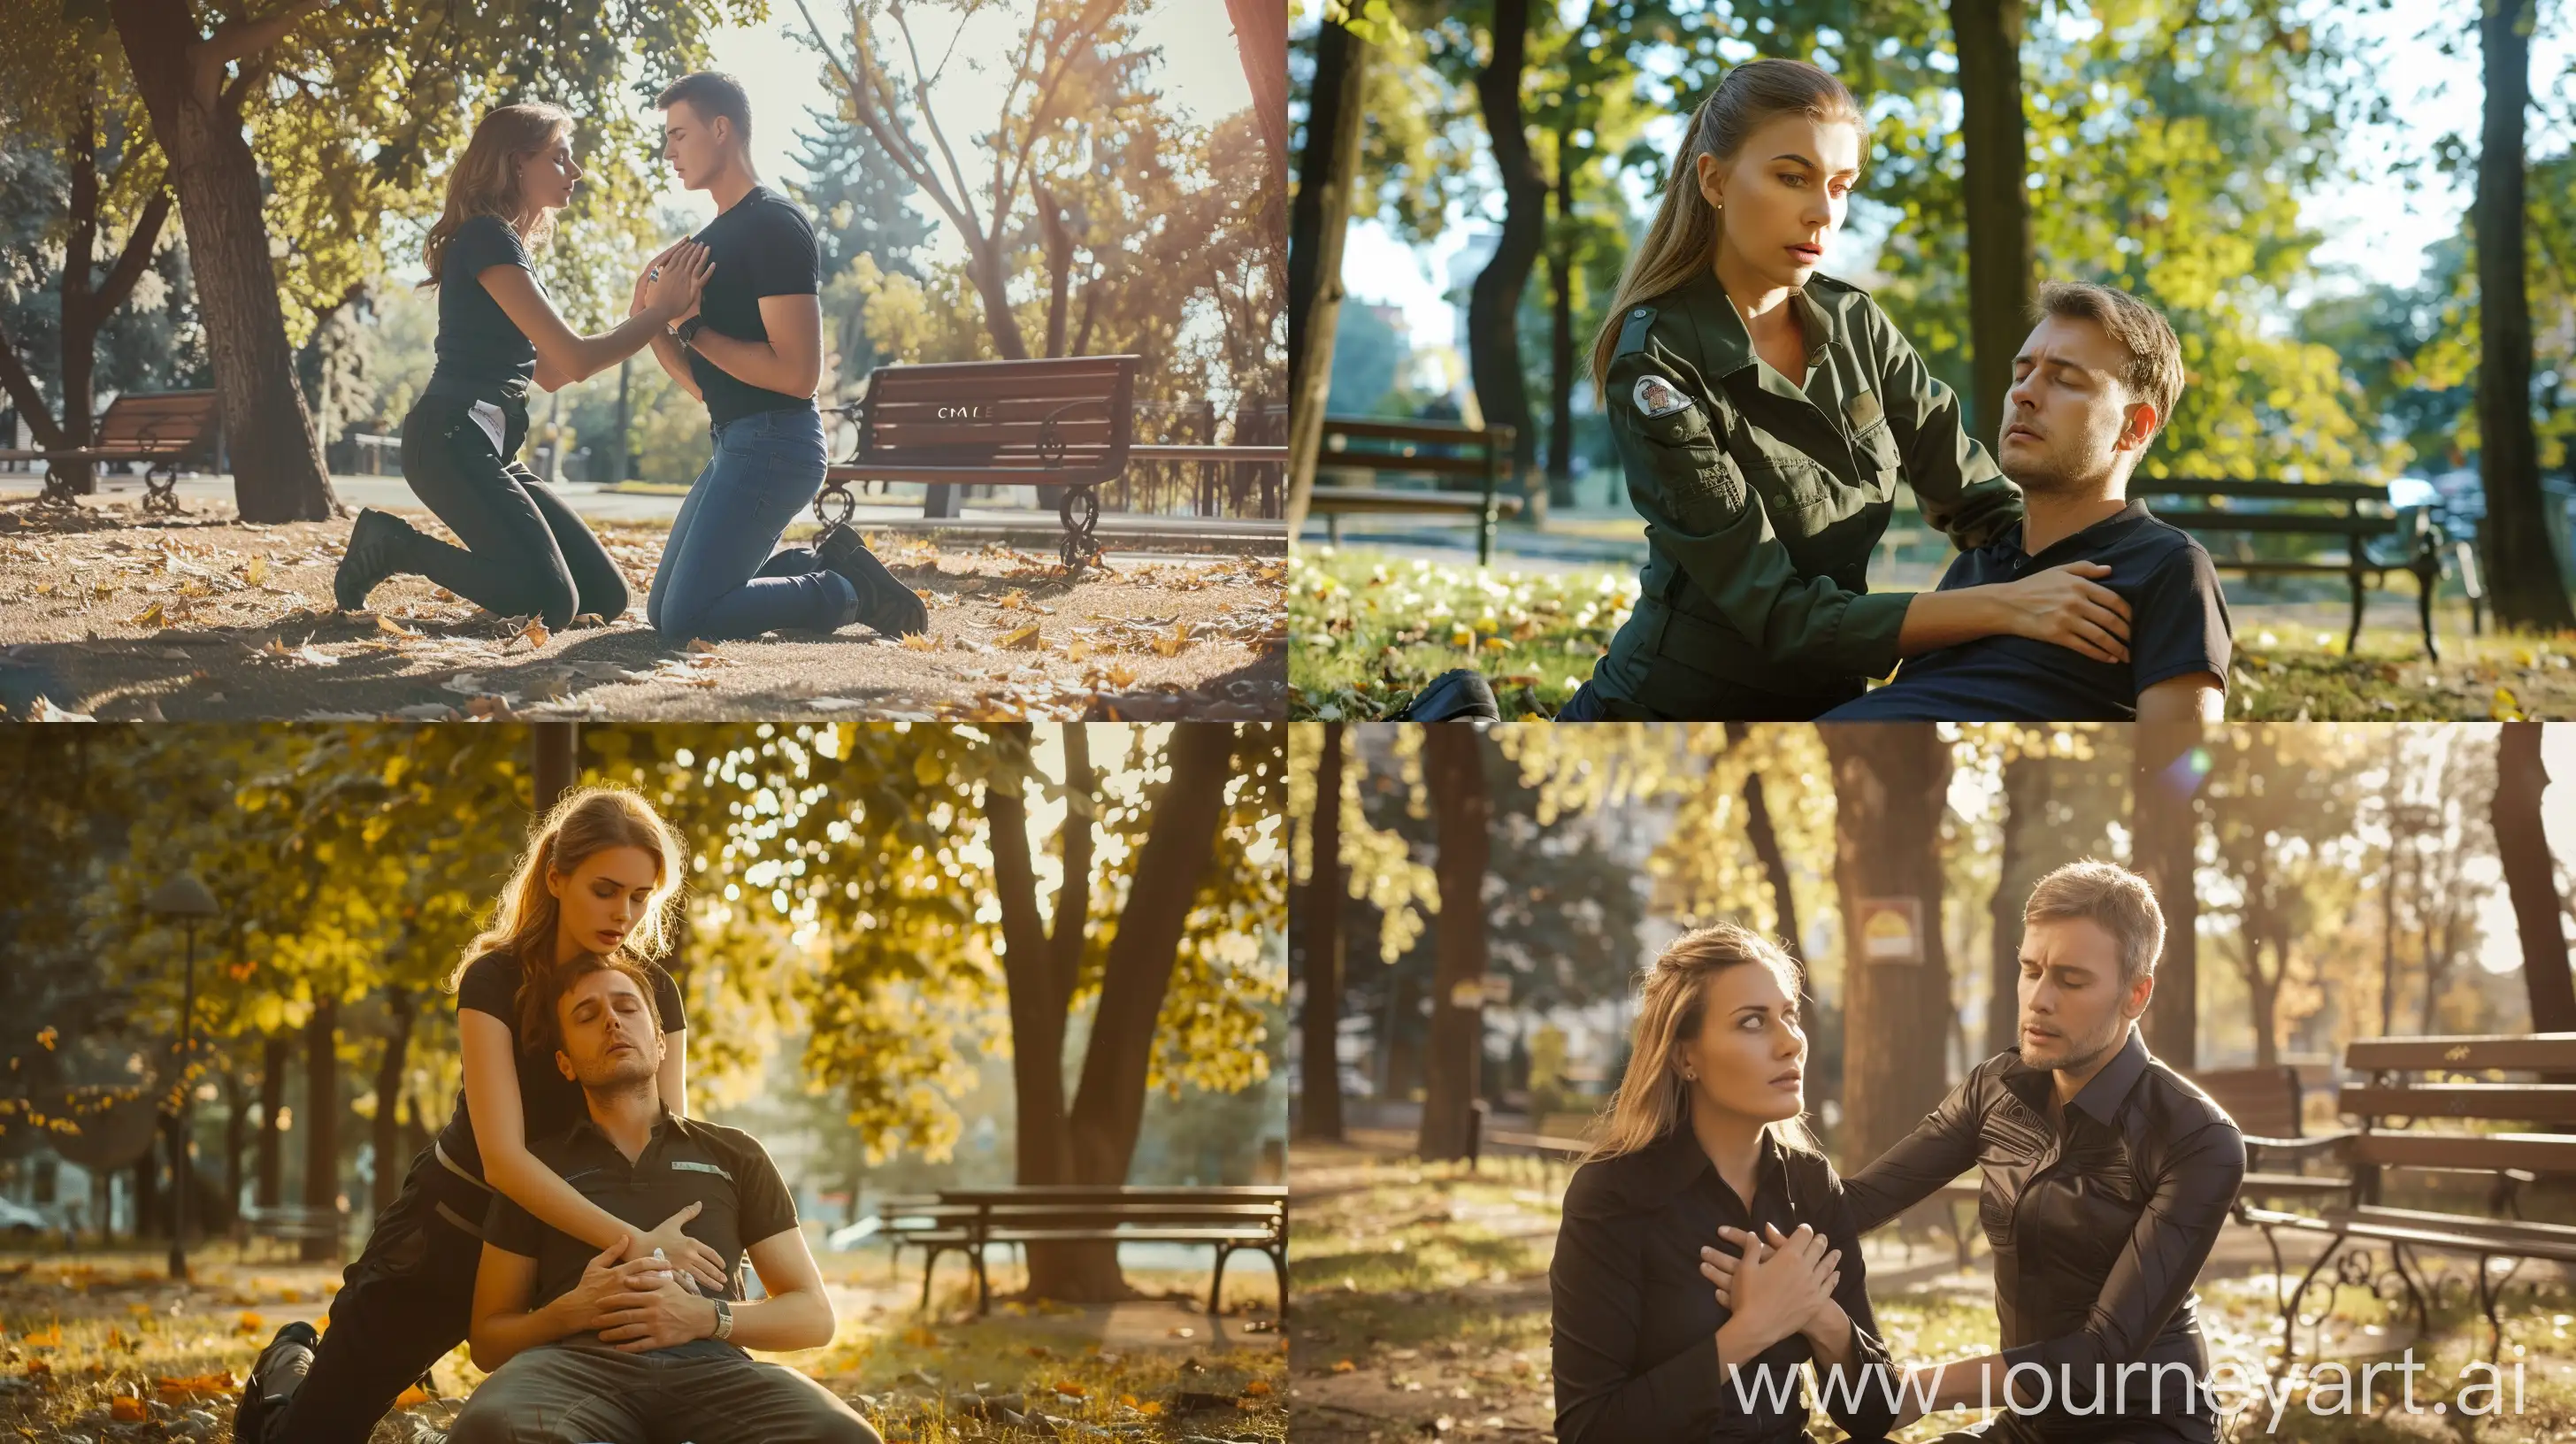 /imagine prompt: A realistic photo of a Caucasian woman giving a Caucasian man Cardiopulmonary resuscitation (CPR), woman kneeling beside the man, pressing on his chest, serious and focused expression, daytime, urban park setting. Trees and benches in the background, soft sunlight filtering through leaves, clear and sharp details, dynamic and vivid lighting, hd quality, natural look --ar 16:9 --v 6.0